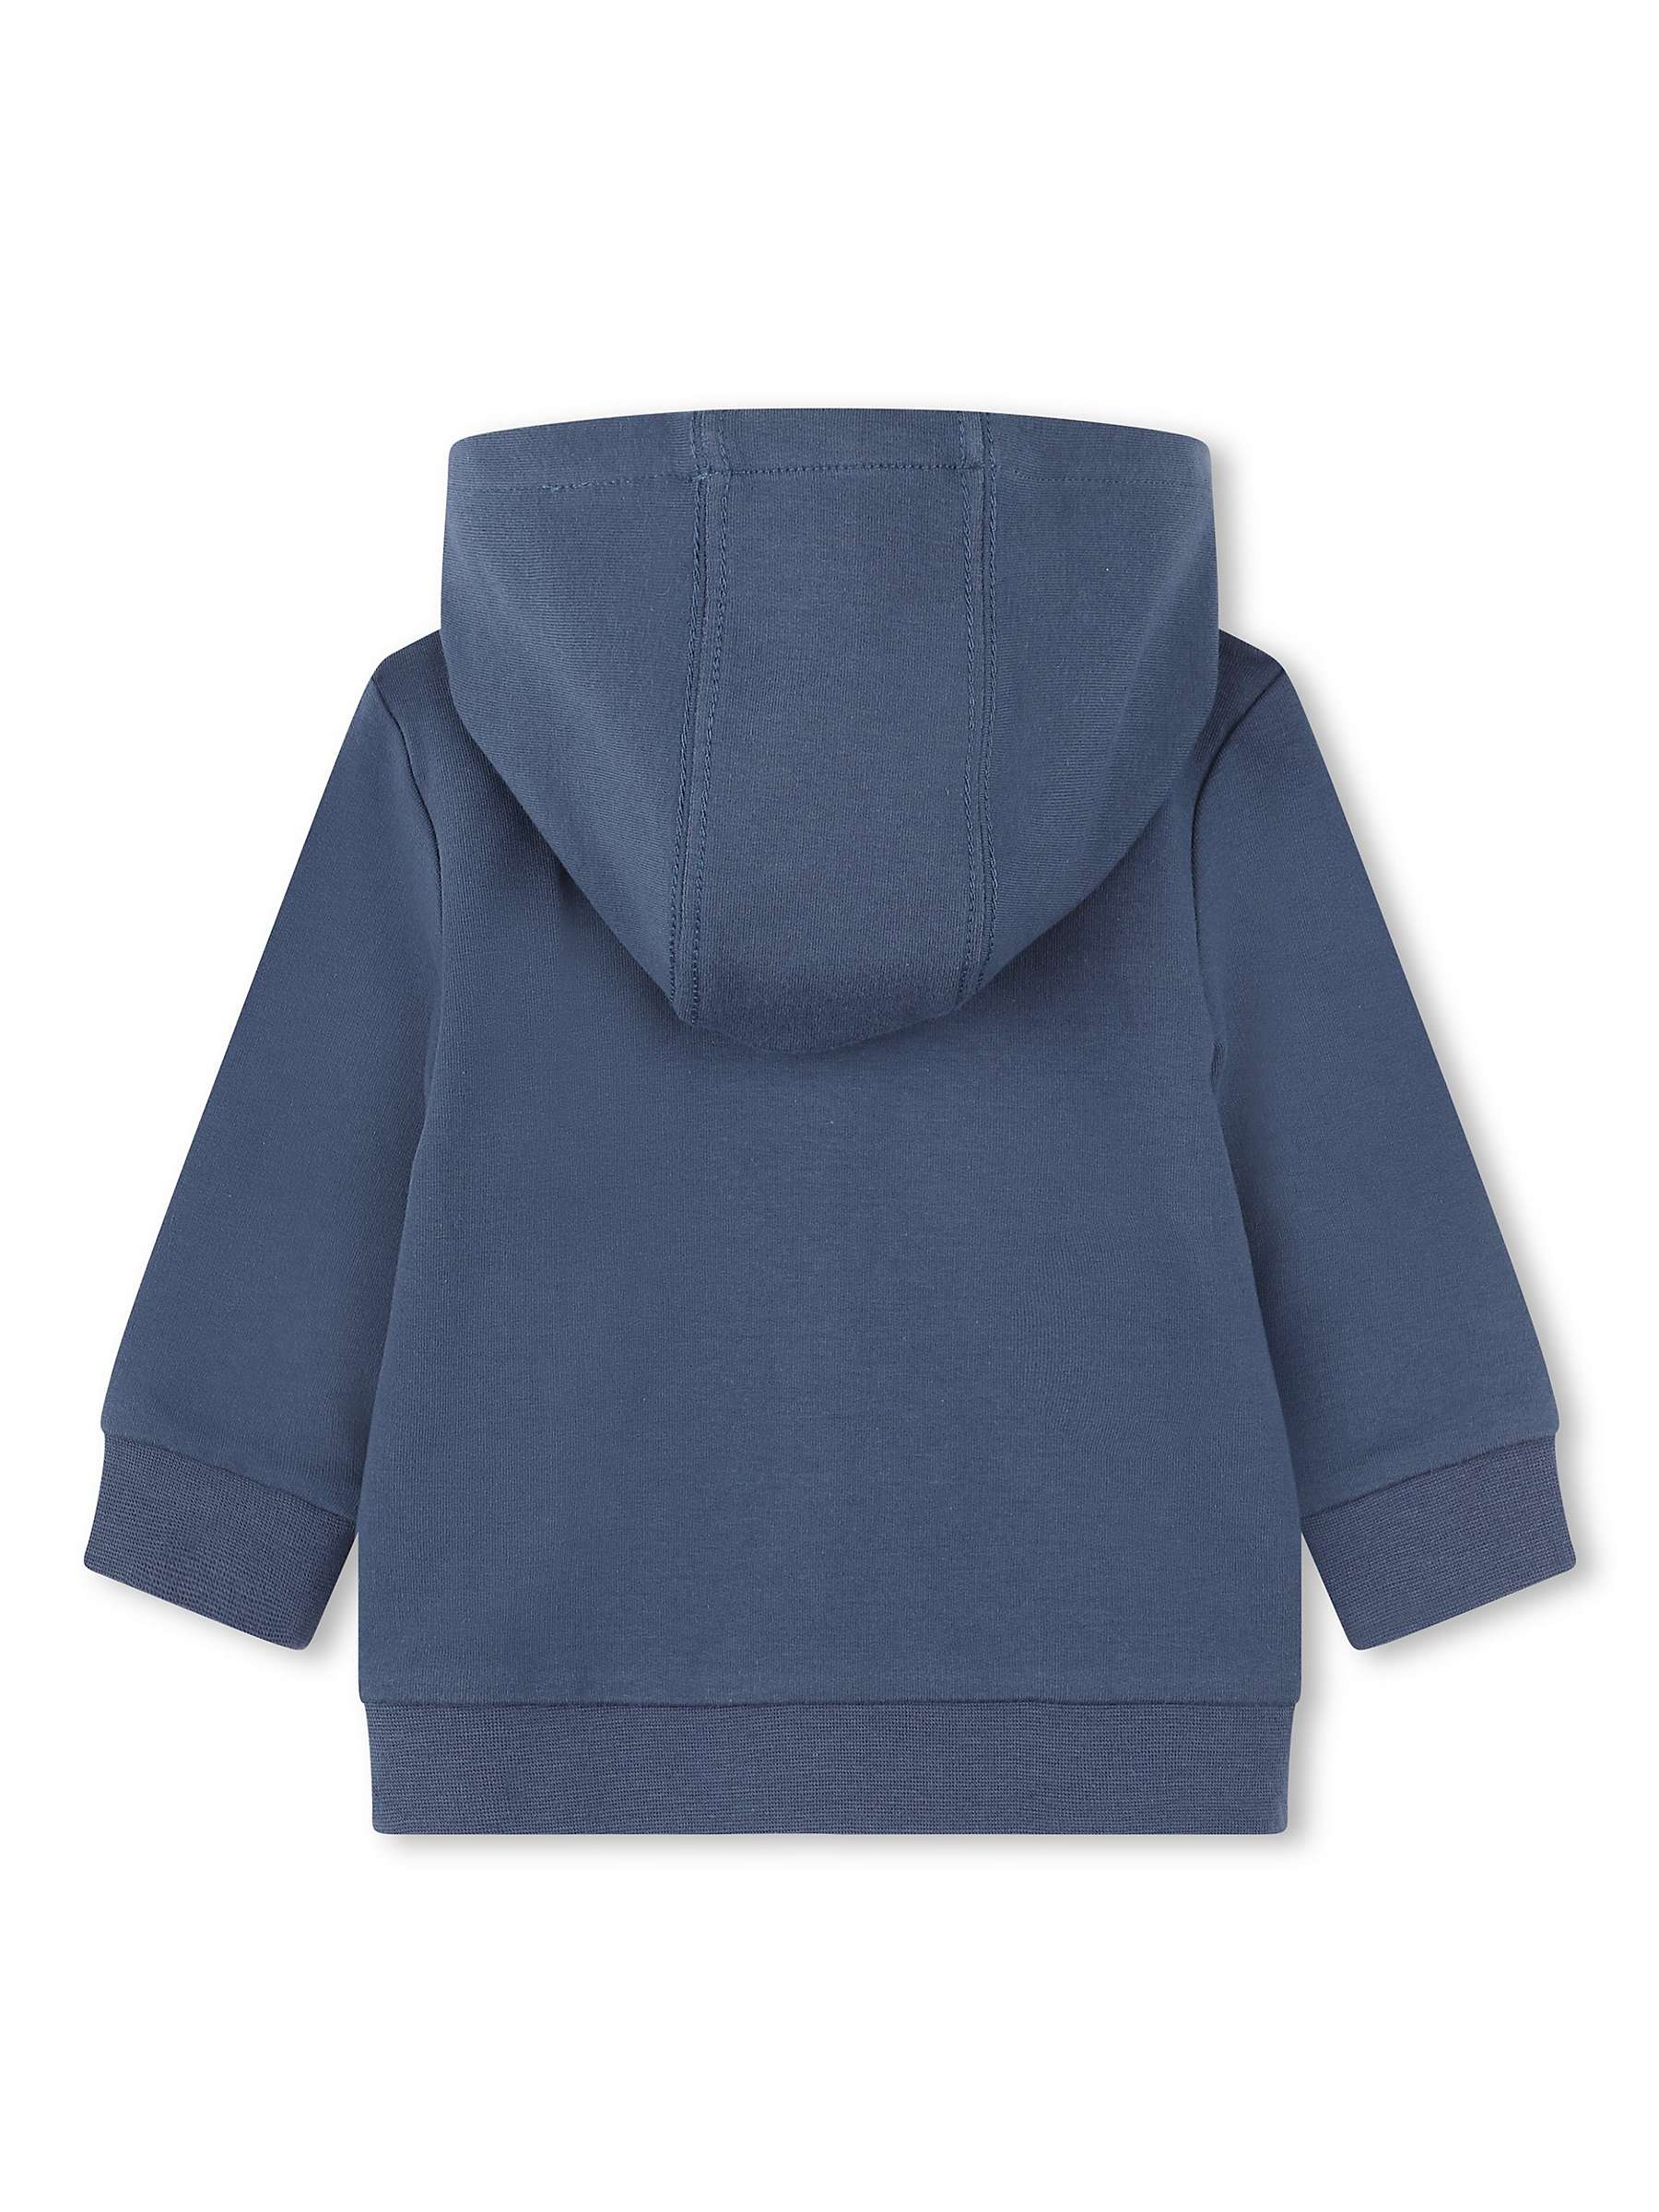 Buy Timberland Baby Colour Block Hooded Cardigan, Navy/White Online at johnlewis.com